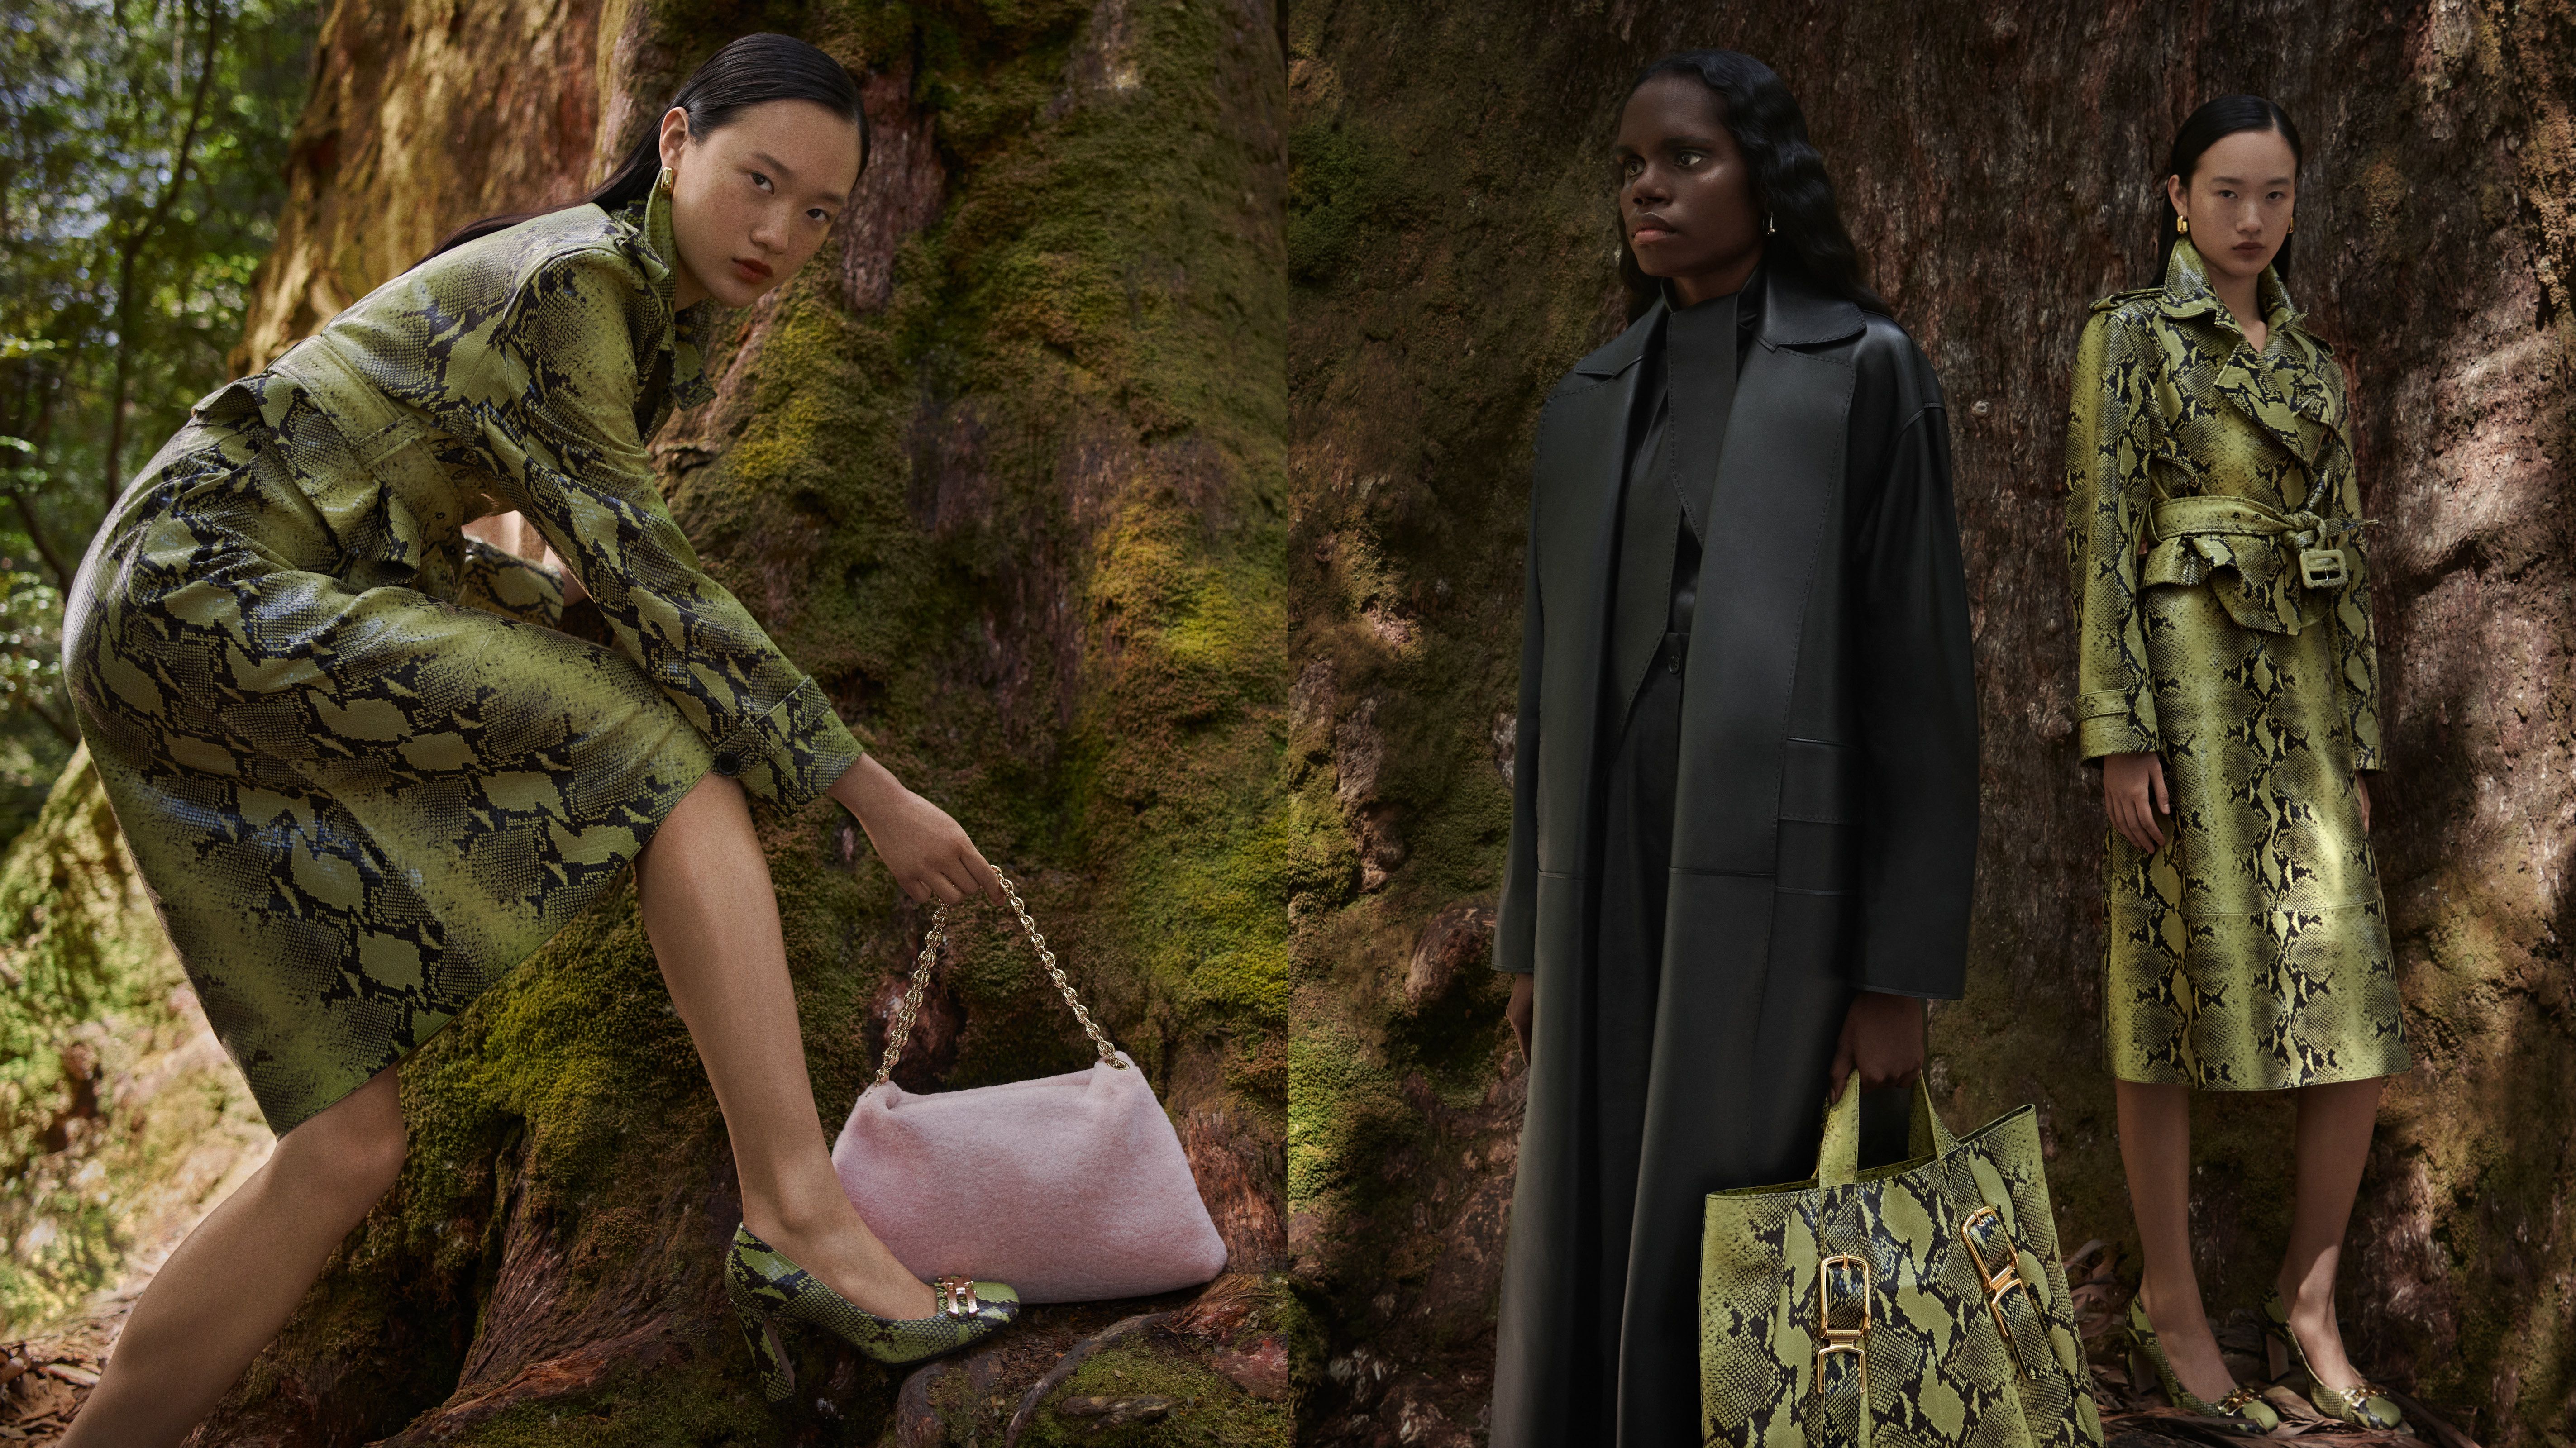 Venus He and Venus He standing in front of a tree wearing a reptile-print leather trench coatstanding in front of a tree wearing a reptile-print leather trench coat and black leather trench, respectively.